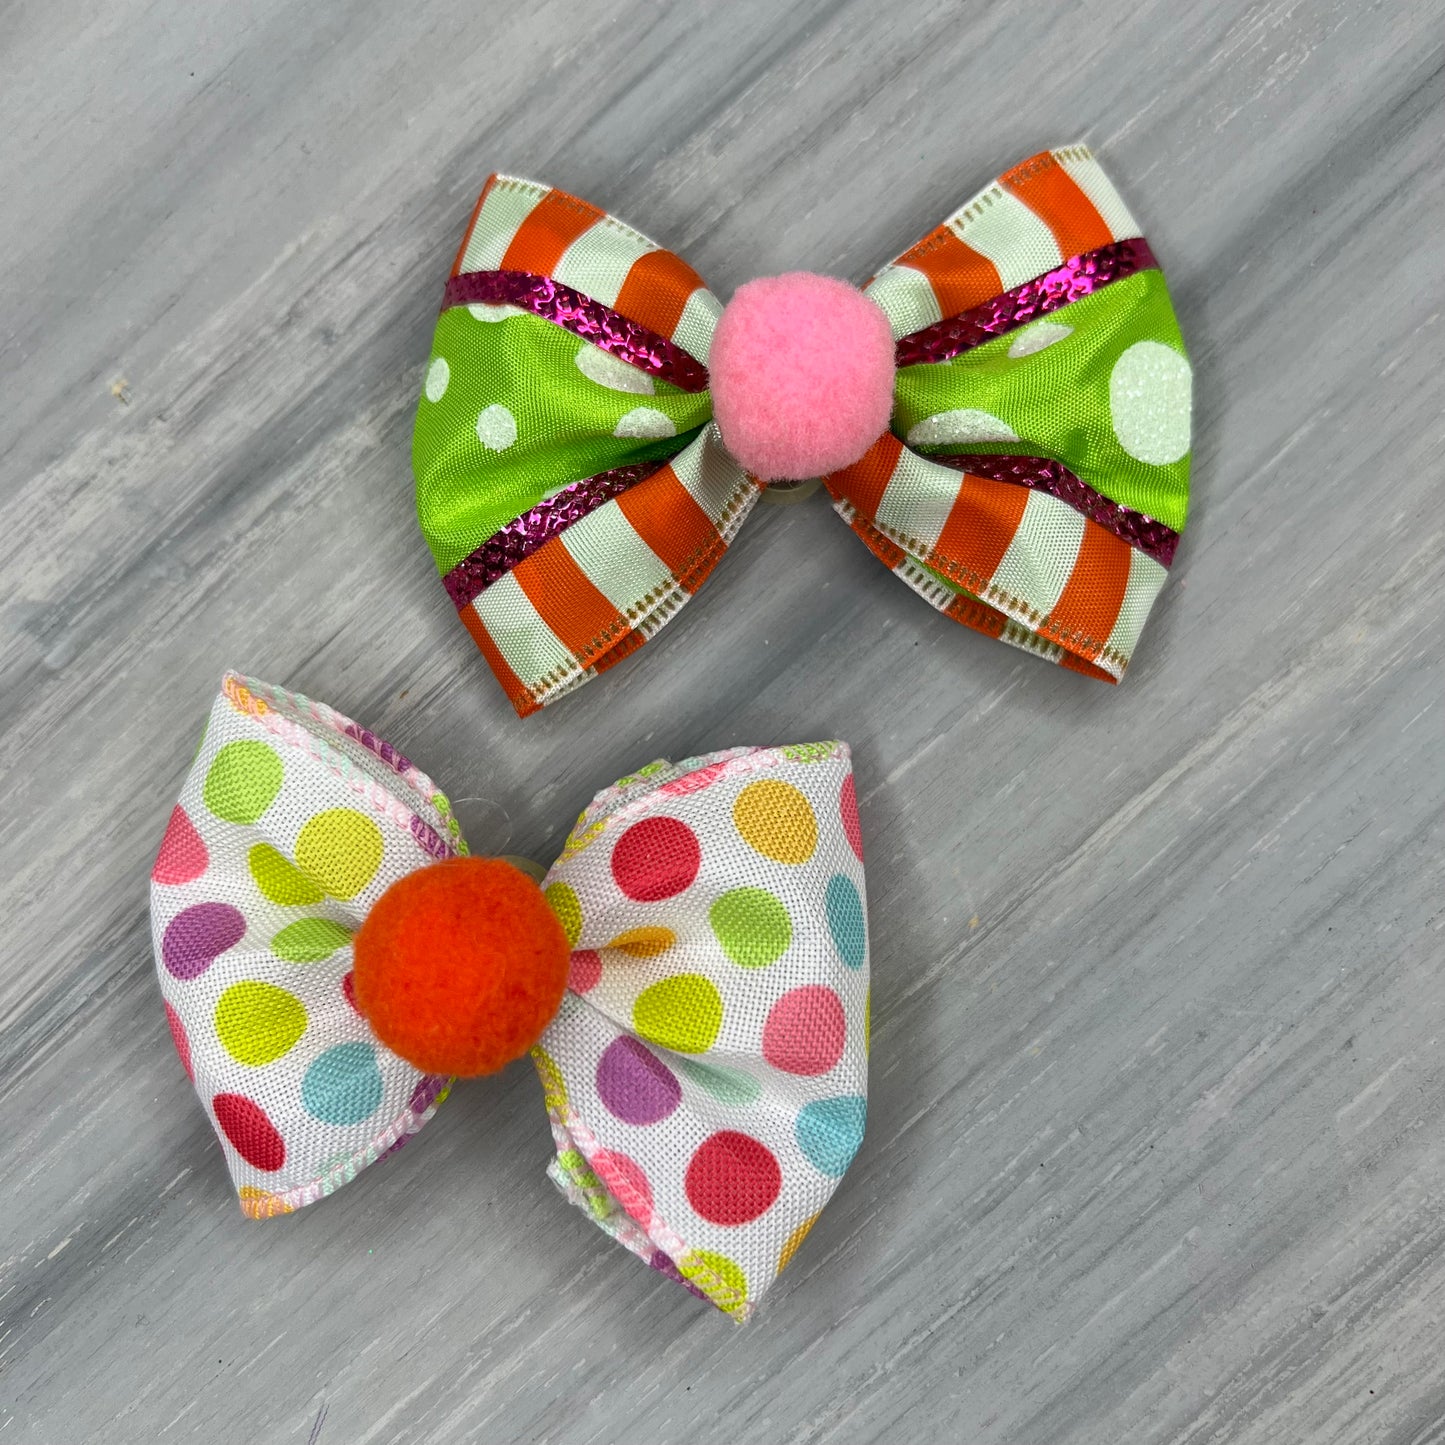 Dotties - Over the Top - 12 Large Bows